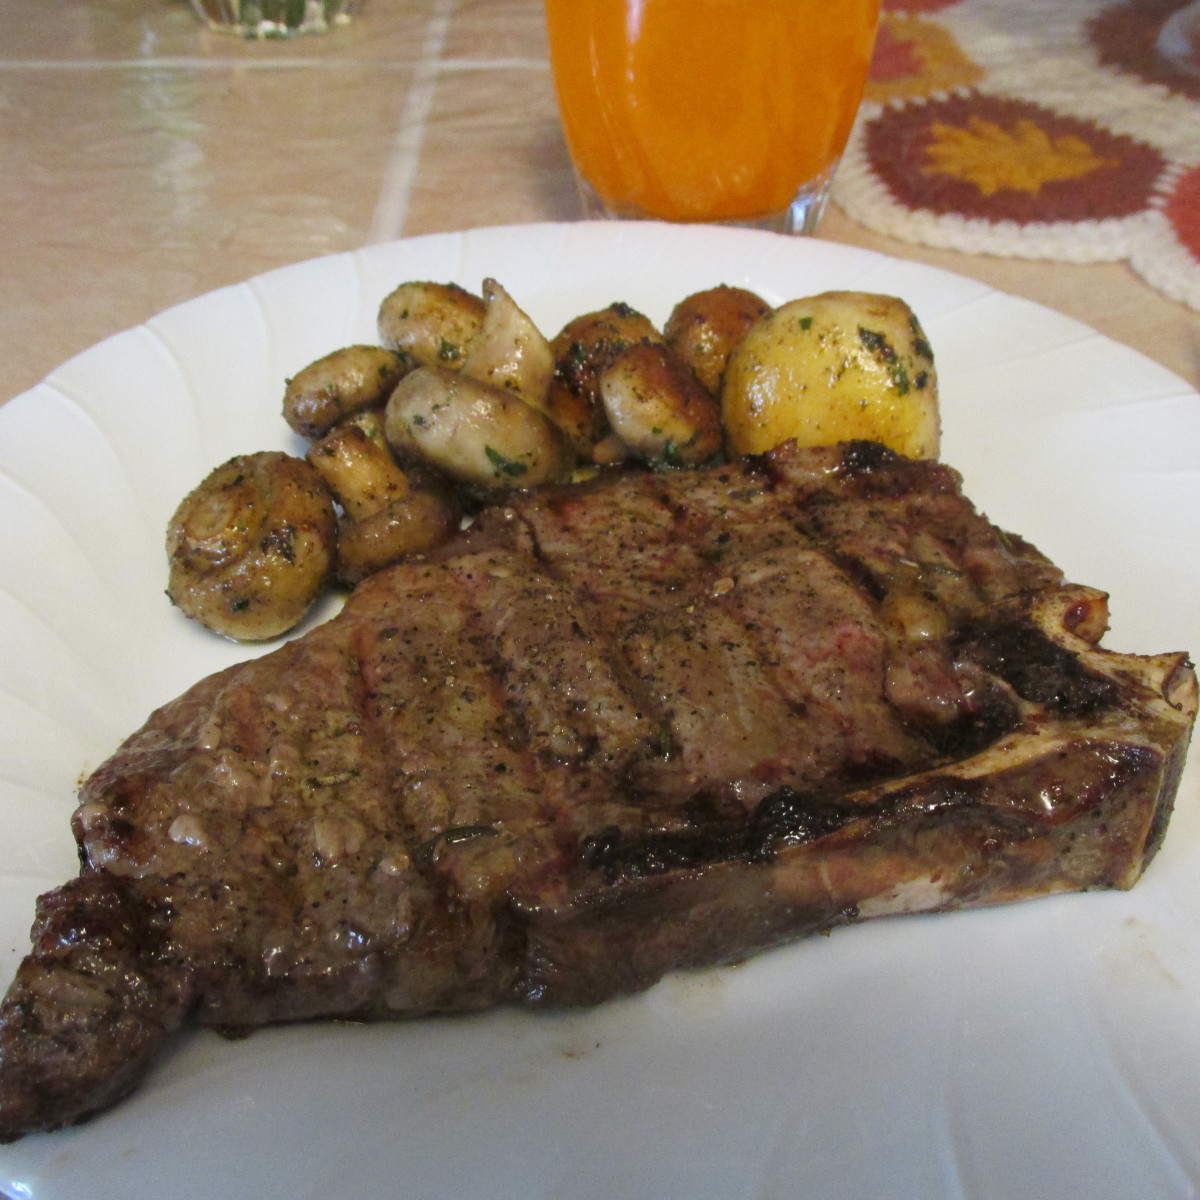 Low-Carb Meal: Steak & Mushrooms With Peanut Butter Dessert